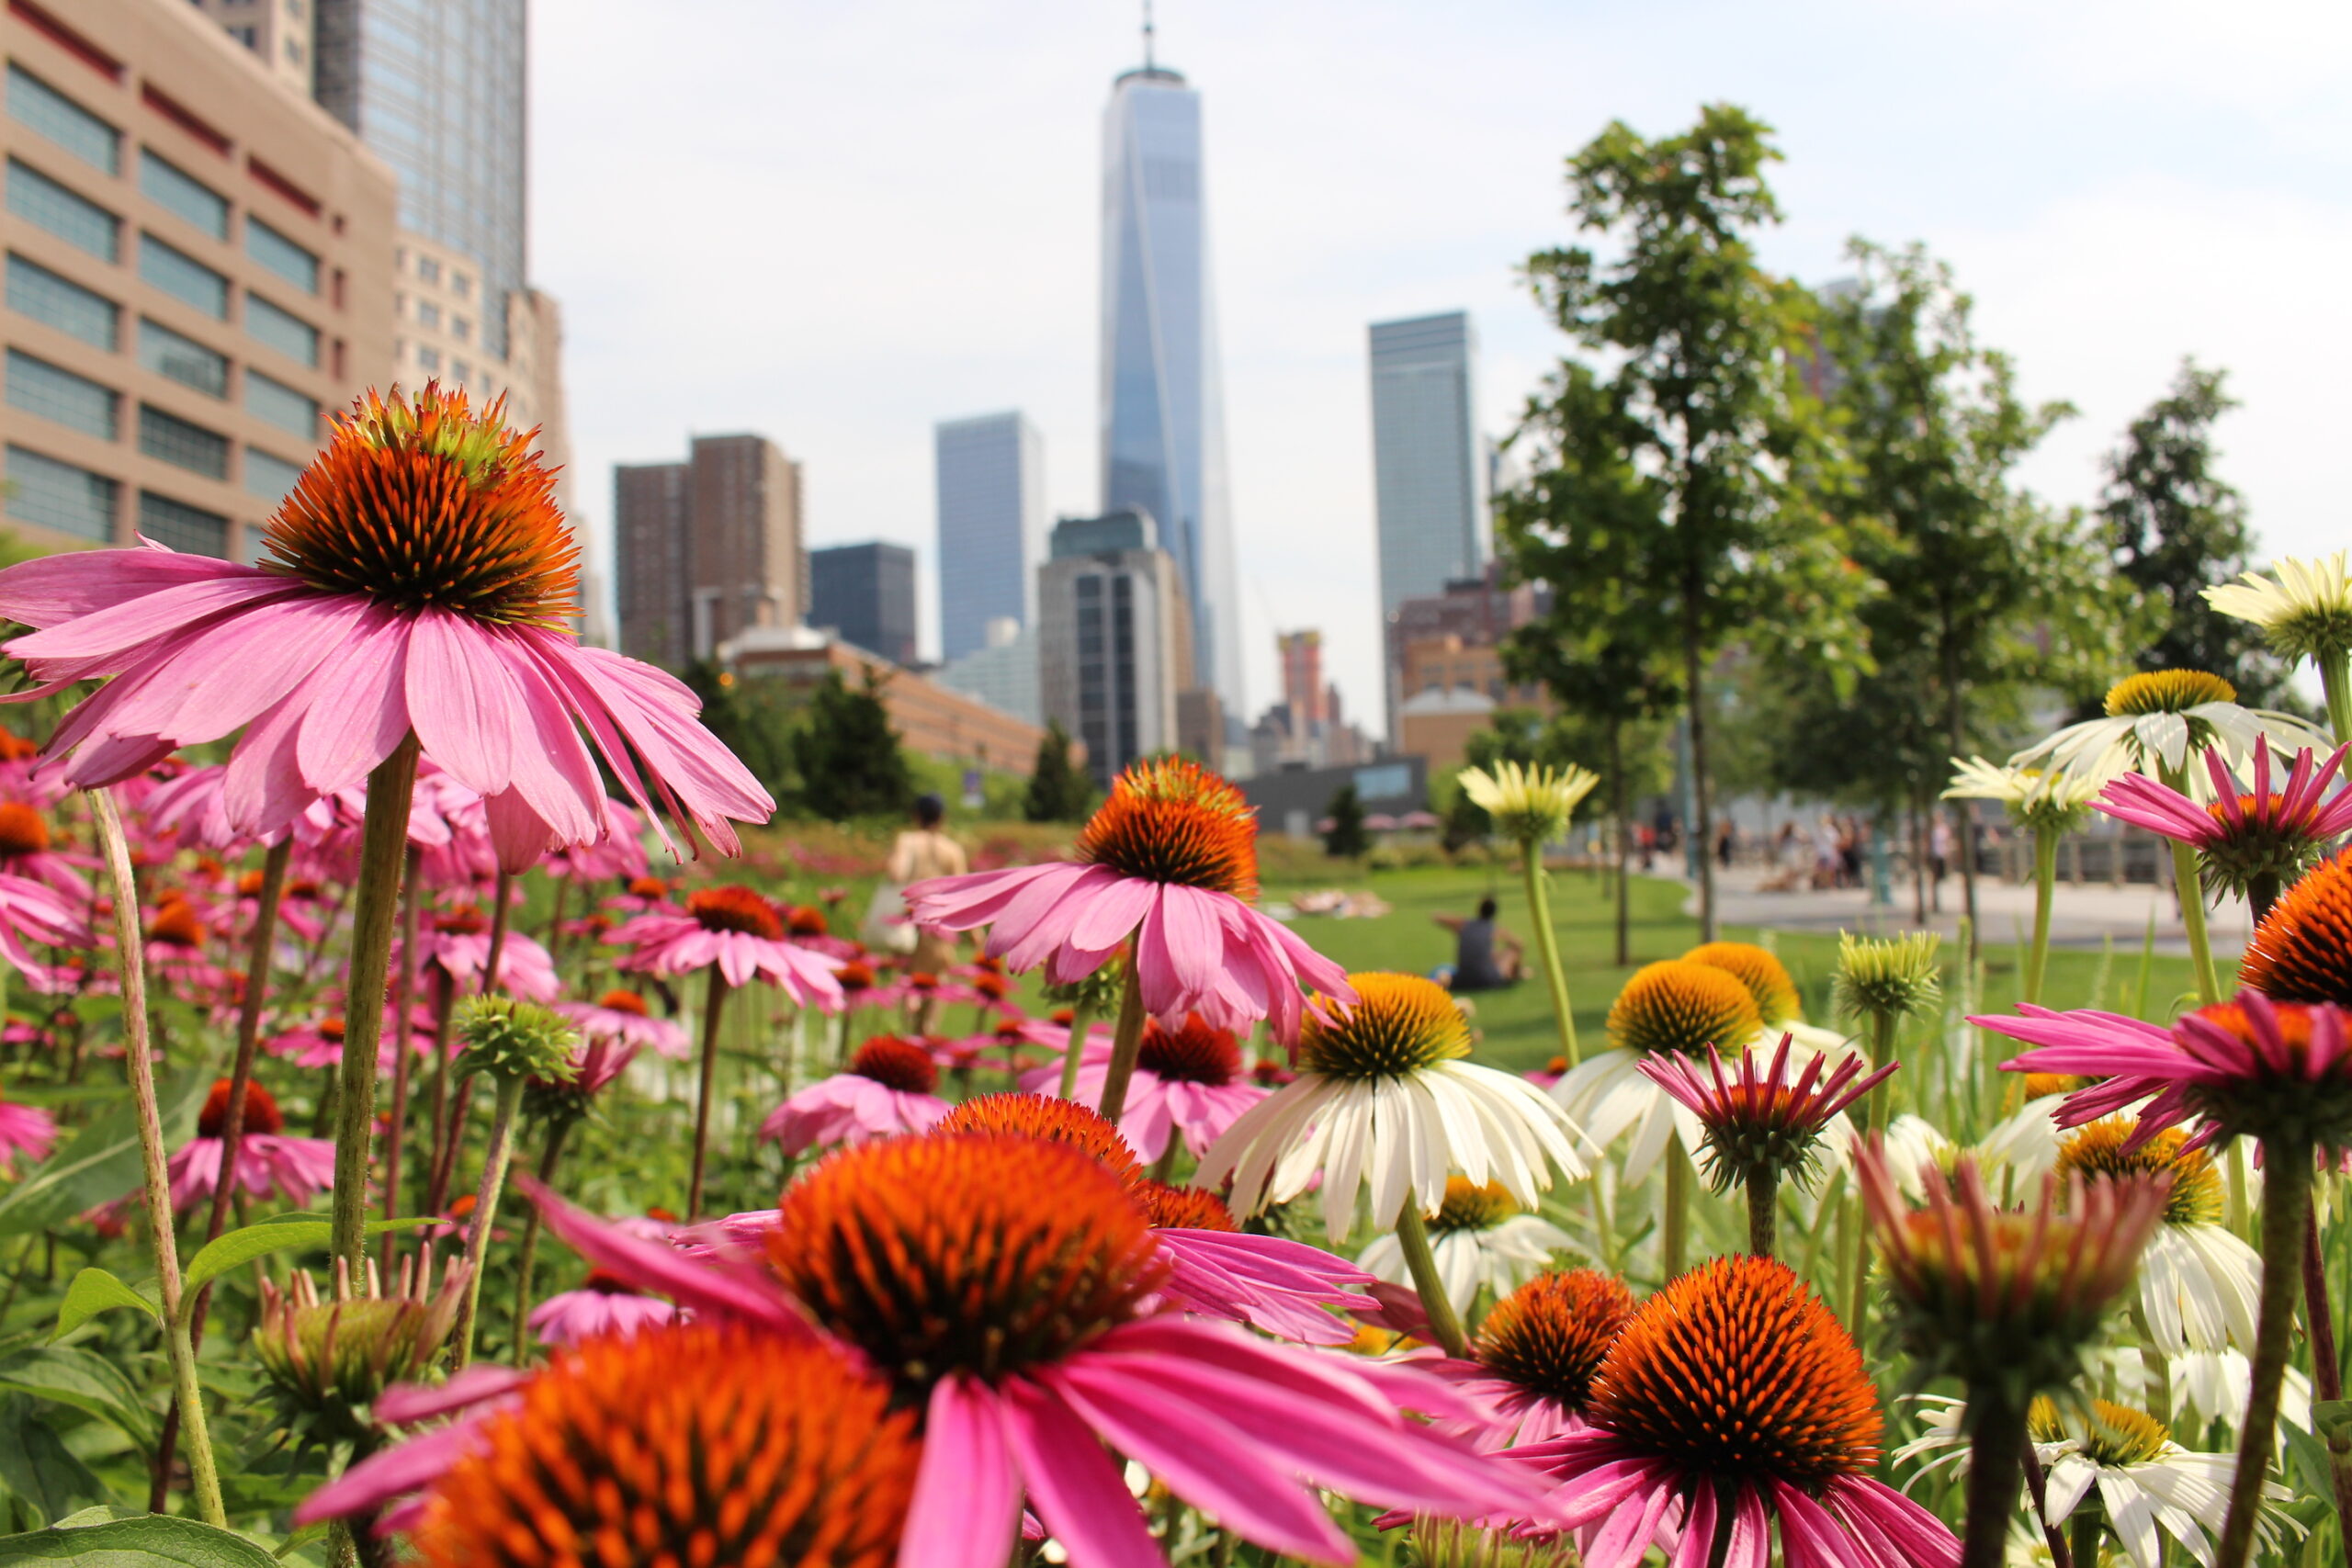 Coneflowers (echinacea) growing in a Park garden with One World Trade Center visible in the background